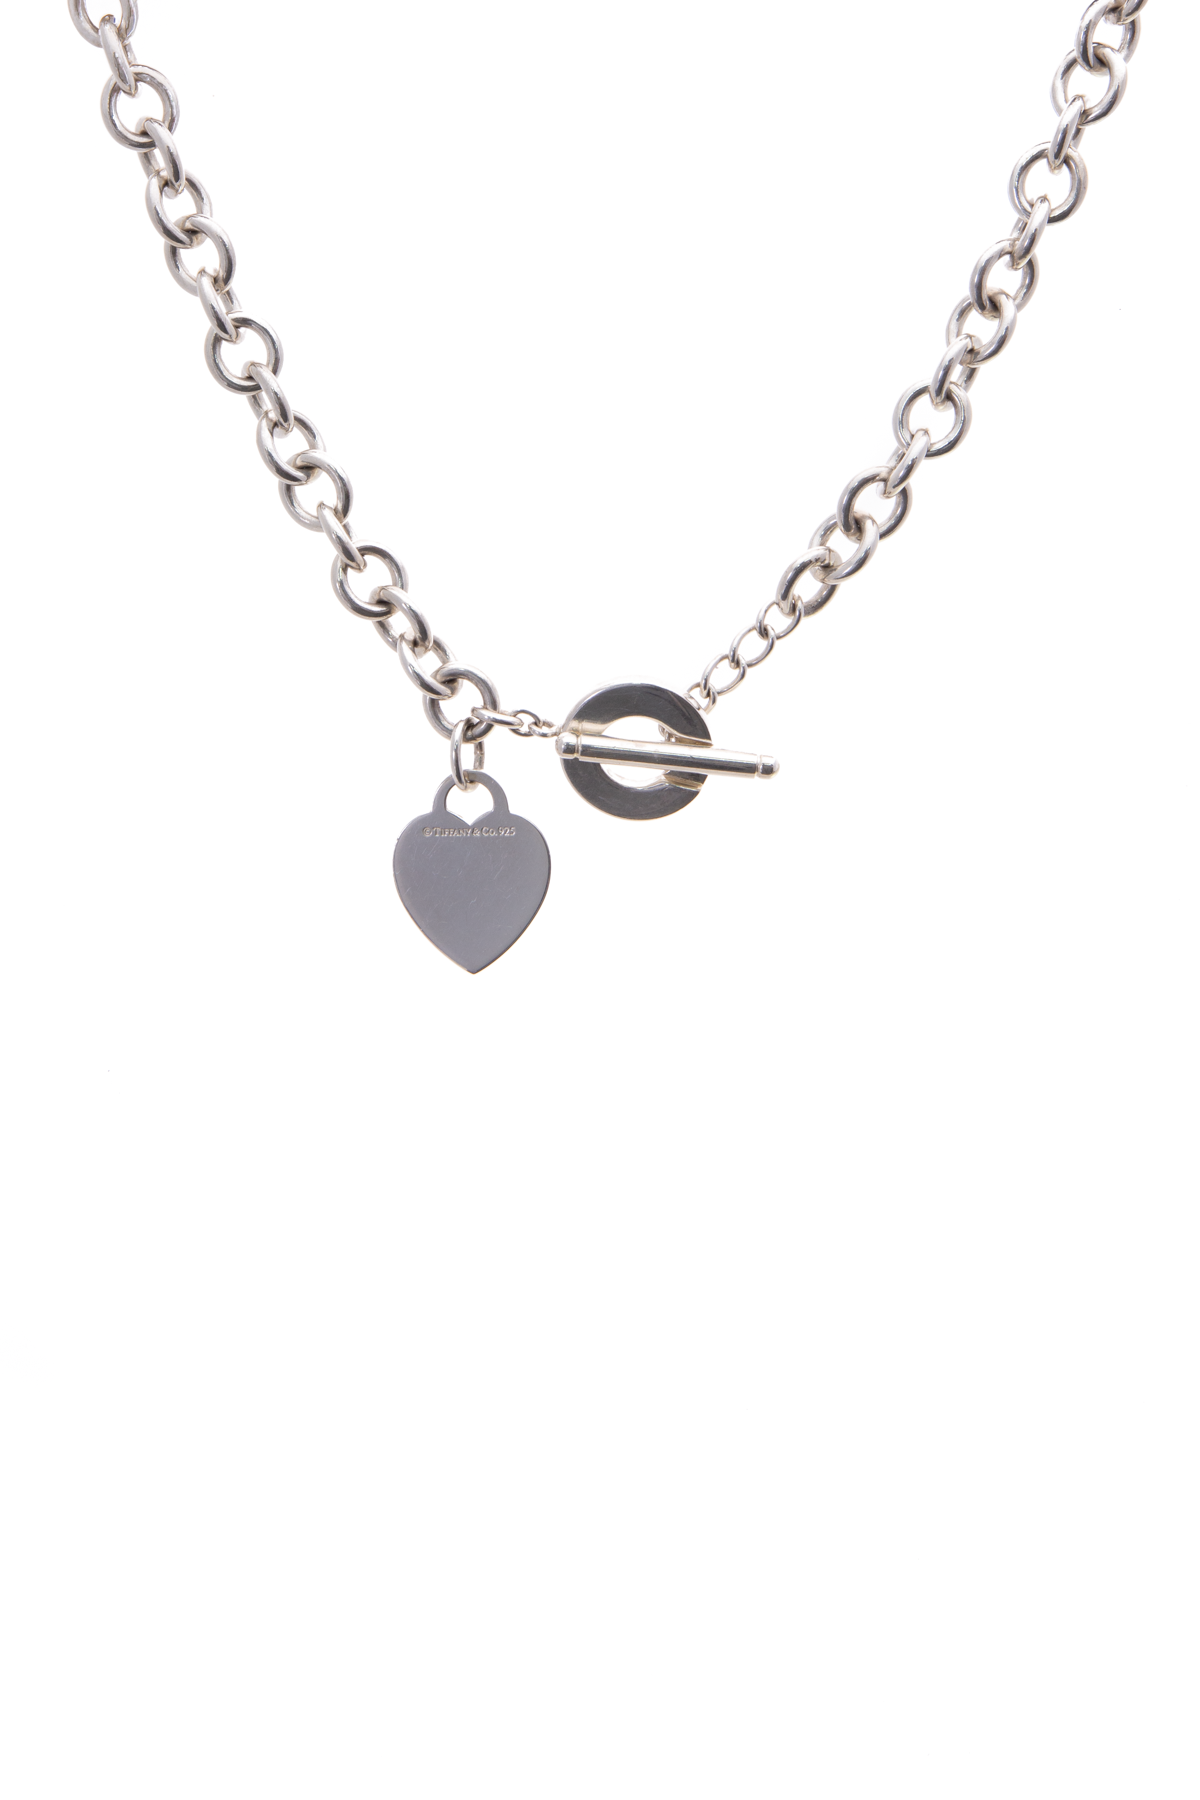 Tiffany & Co. Heart Tag Toggle Necklace - Sterling Silver Chain, Necklaces  - TIF169398 | The RealReal